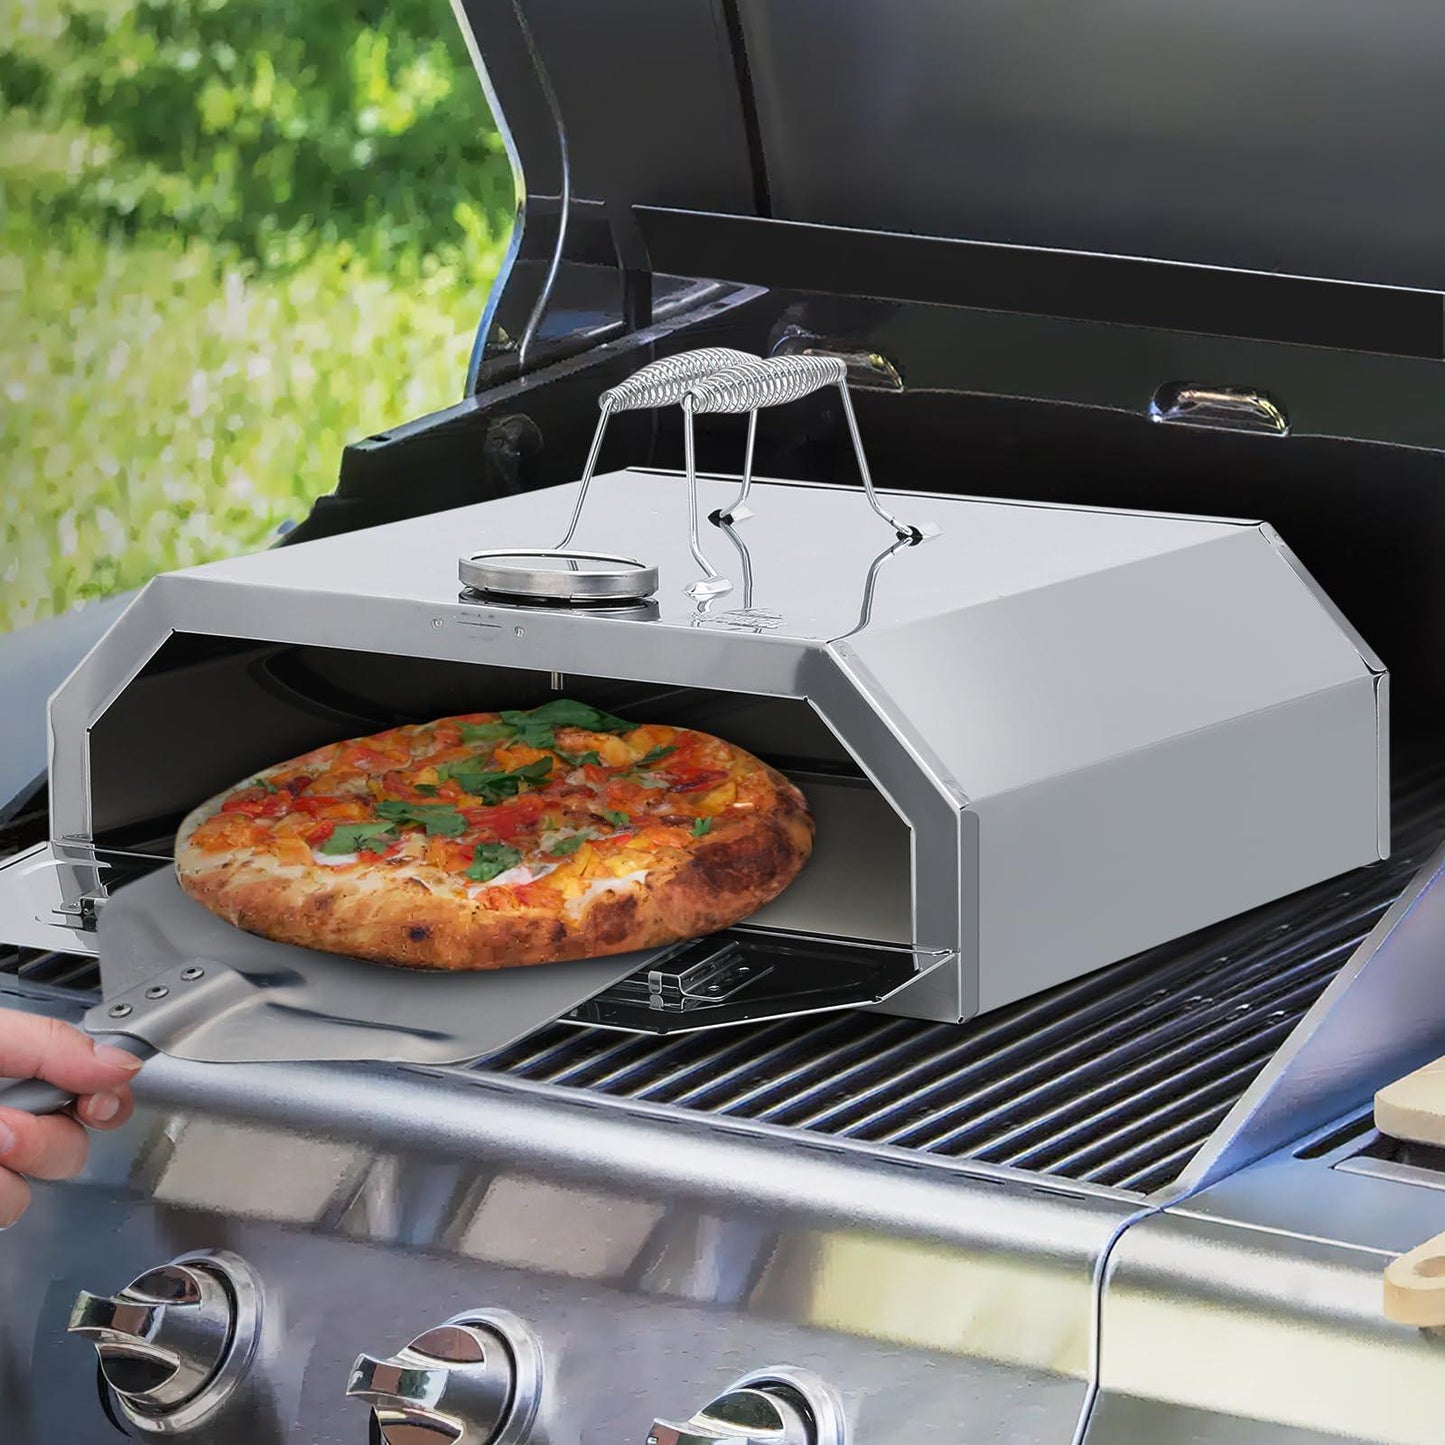 MoNiBloom 15-Inch Outdoor Pizza Oven Portable Stainless Steel Charcoal Pizza Maker Cooking Grill with Built-in Thermometer for Outside, Backyard, Party, Camping - CookCave